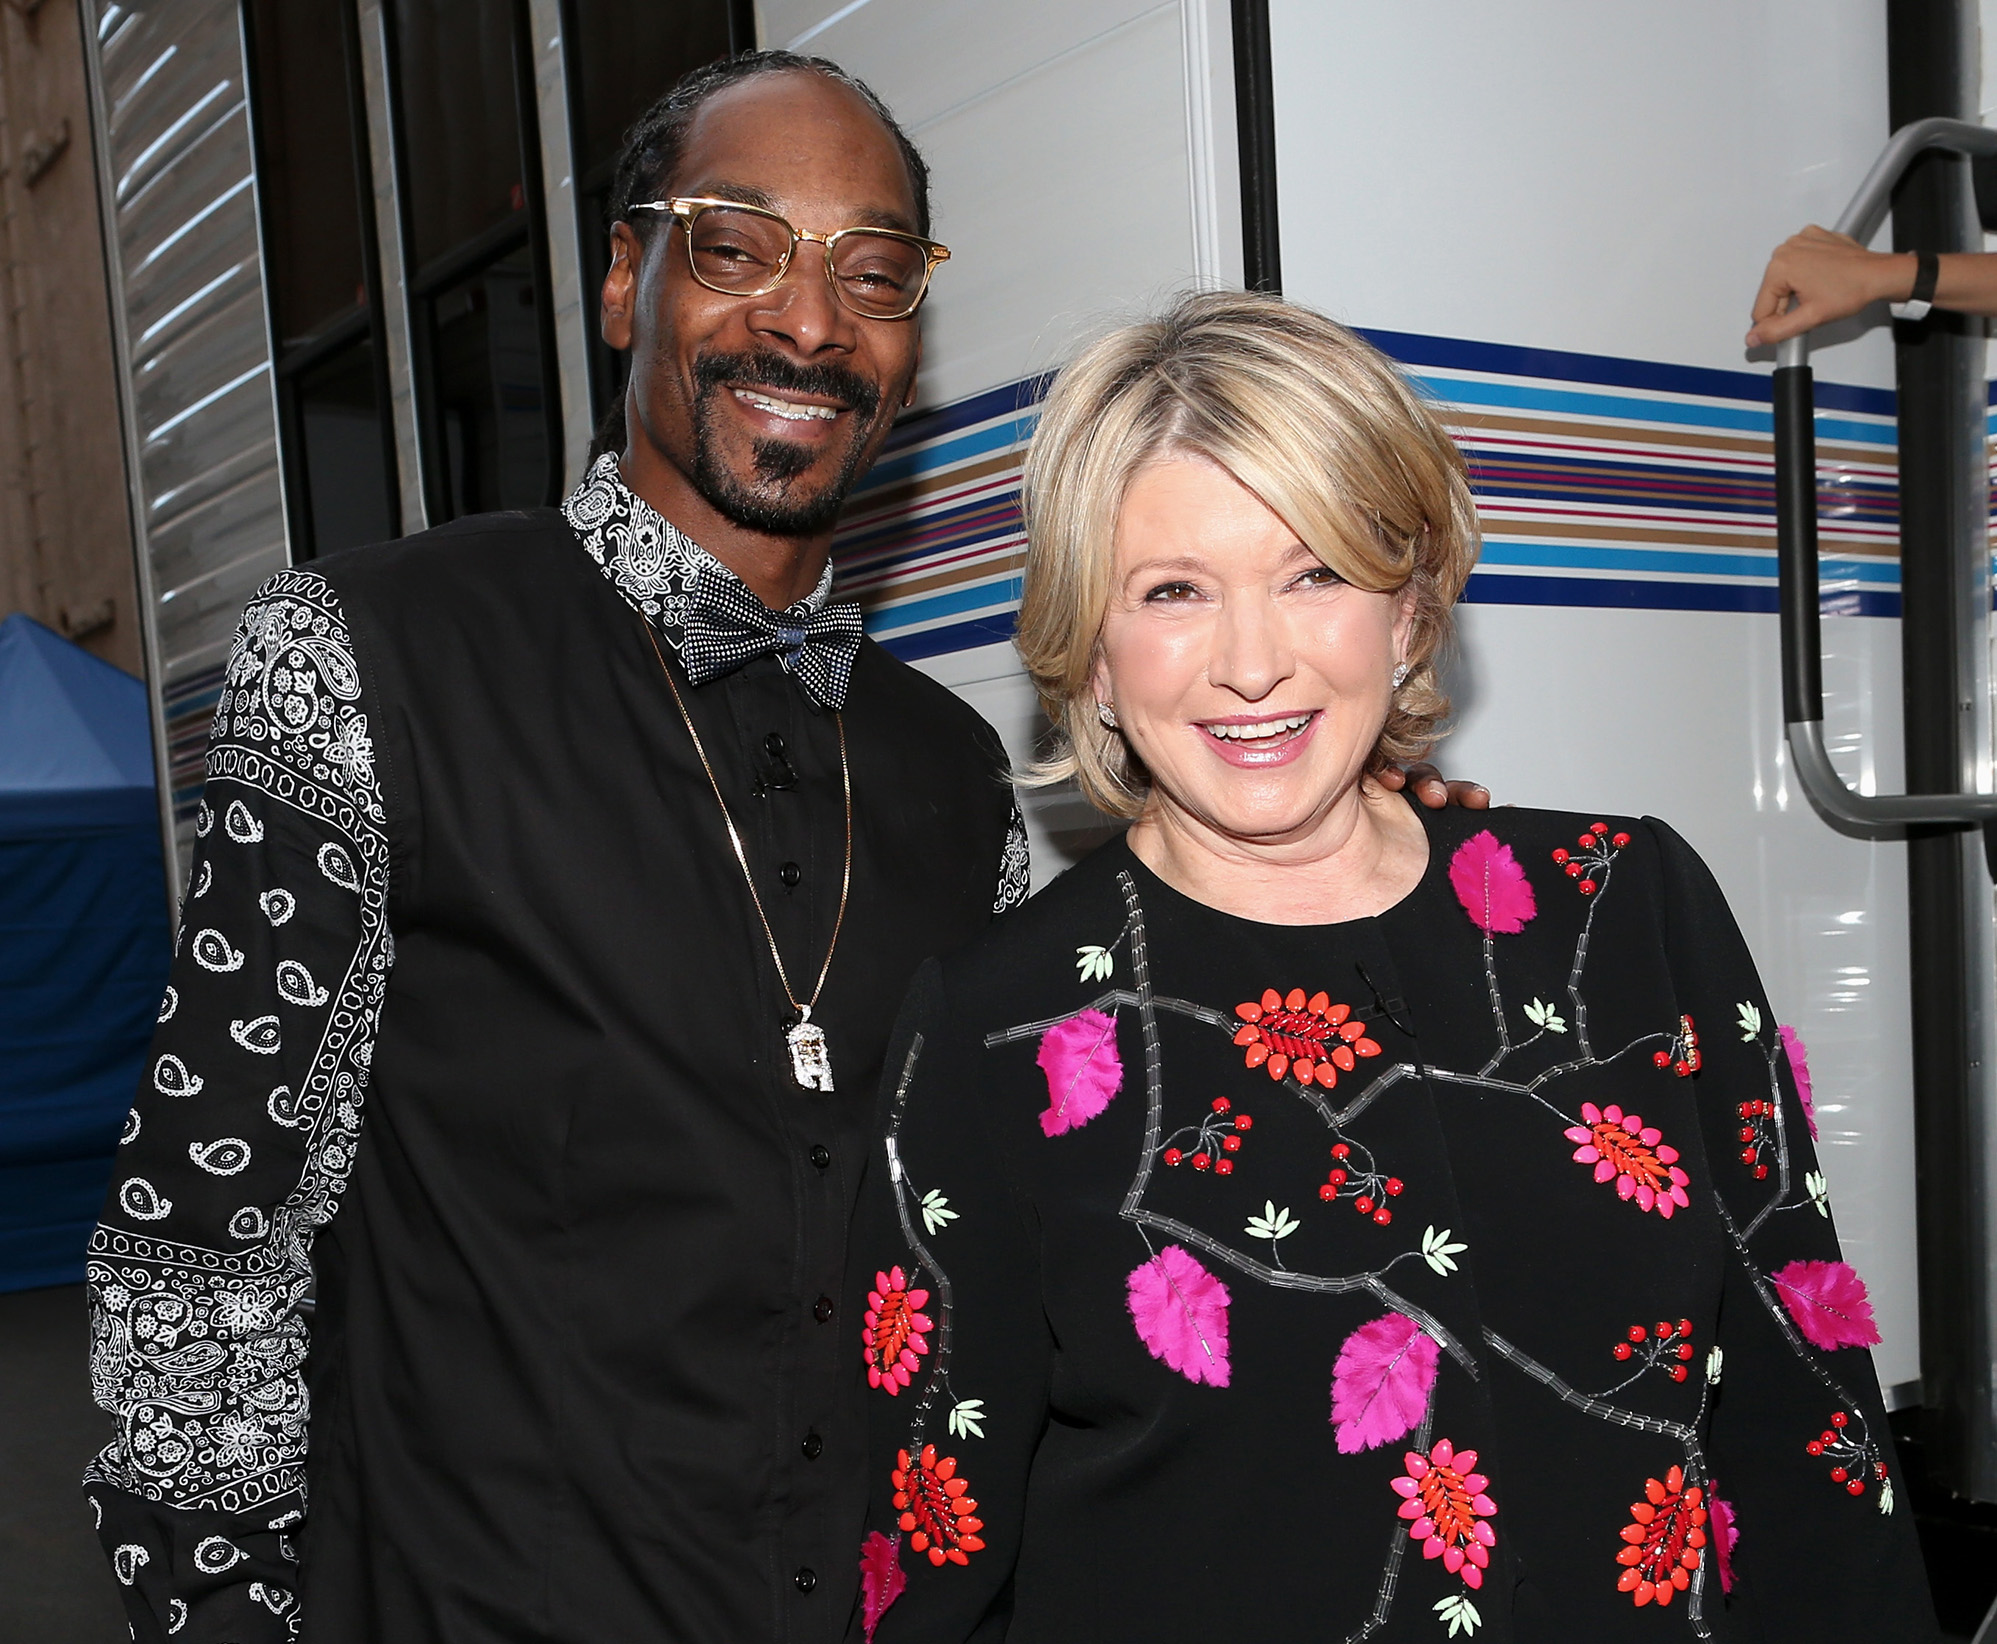 Rapper Snoop Dogg and TV personality Martha Stewart. Courtesy of Christopher Polk/Getty Images.